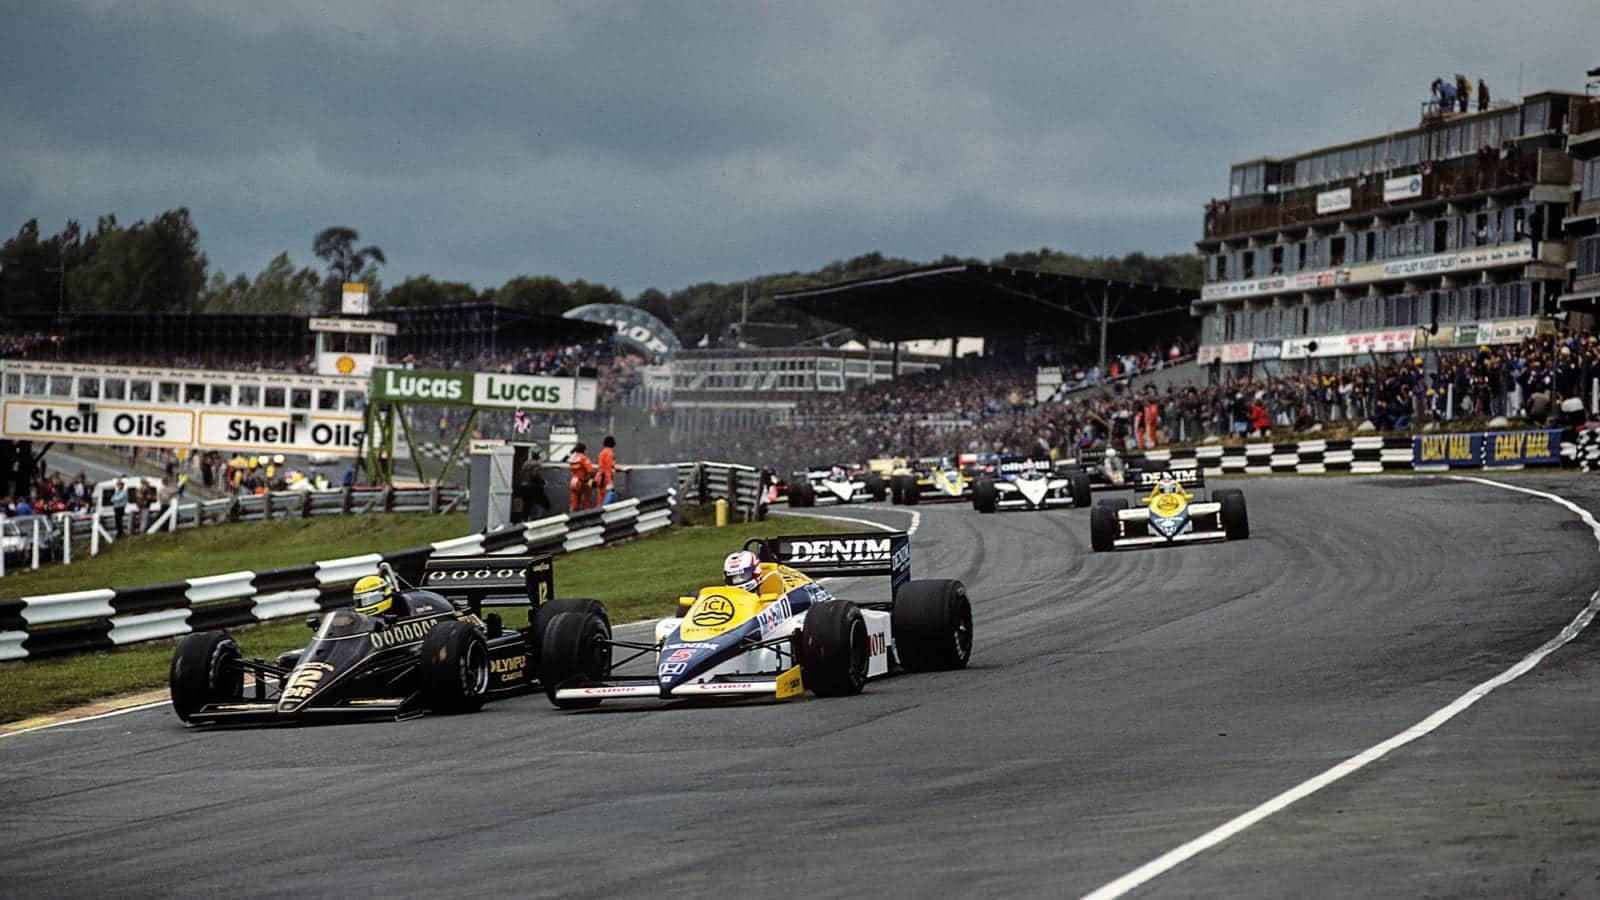 Nigel Mansell battles with Ayrton Senna on his way to victory at the 1985 British Grand Prix at Brands Hatch